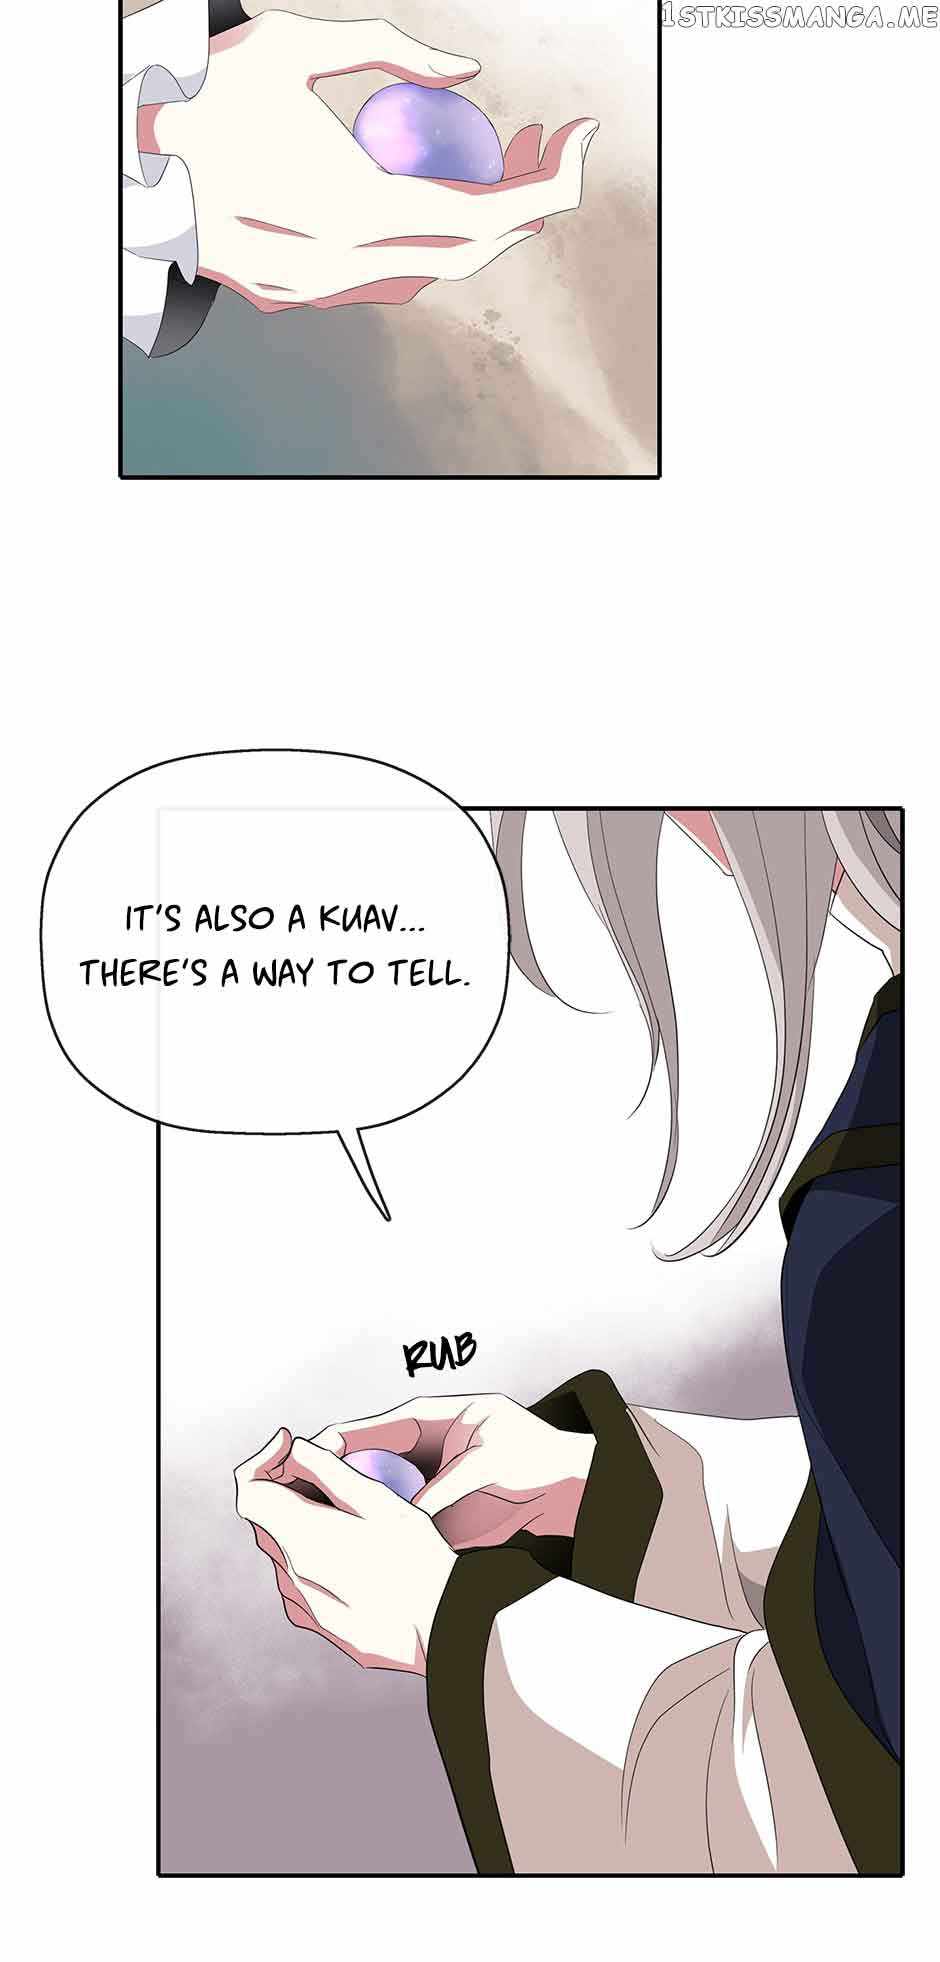 I’m a Killer but I’m Thinking of Living as a Princess Chapter 56-eng-li - Page 5